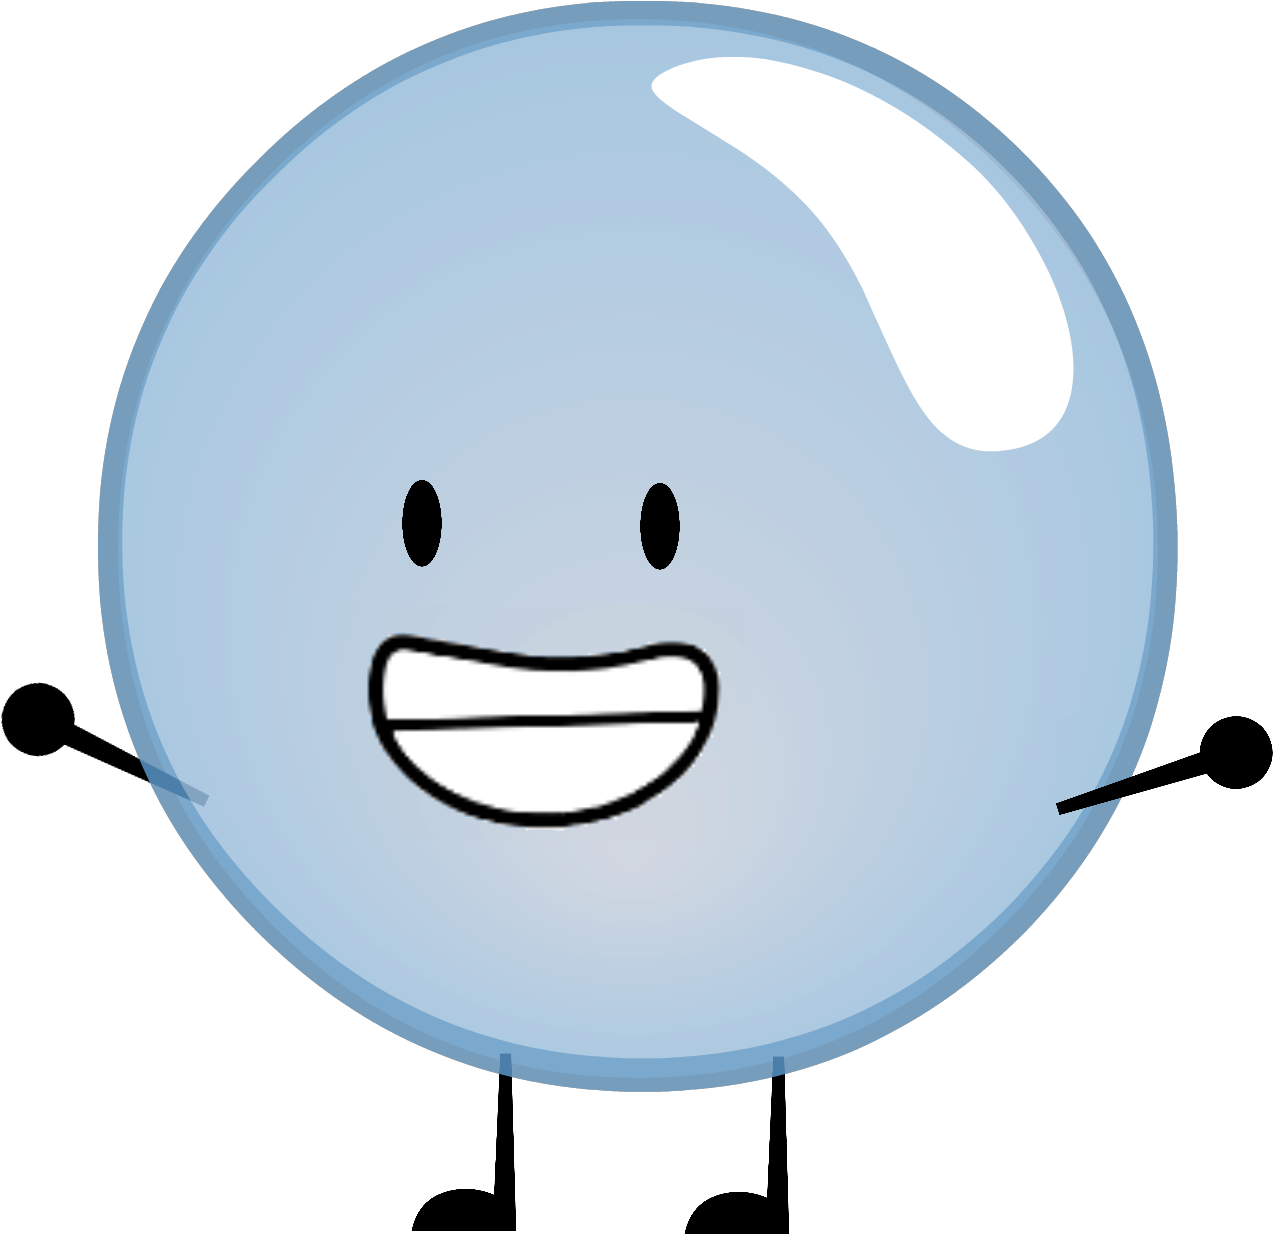 Bfdi Bubble, Find more high quality free transparent png clipart images on ...